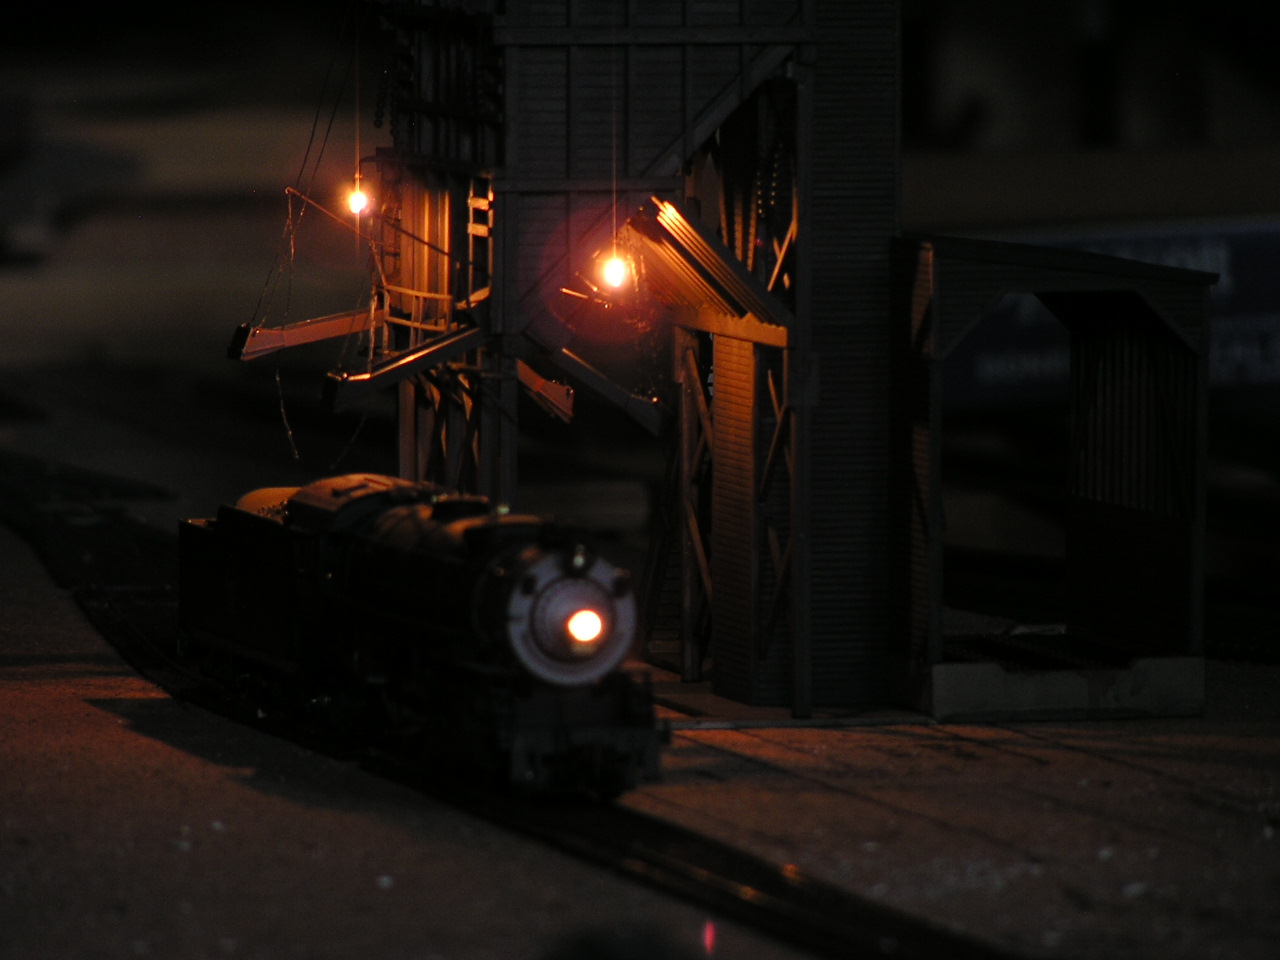 Nighttime At The Coaling Tower